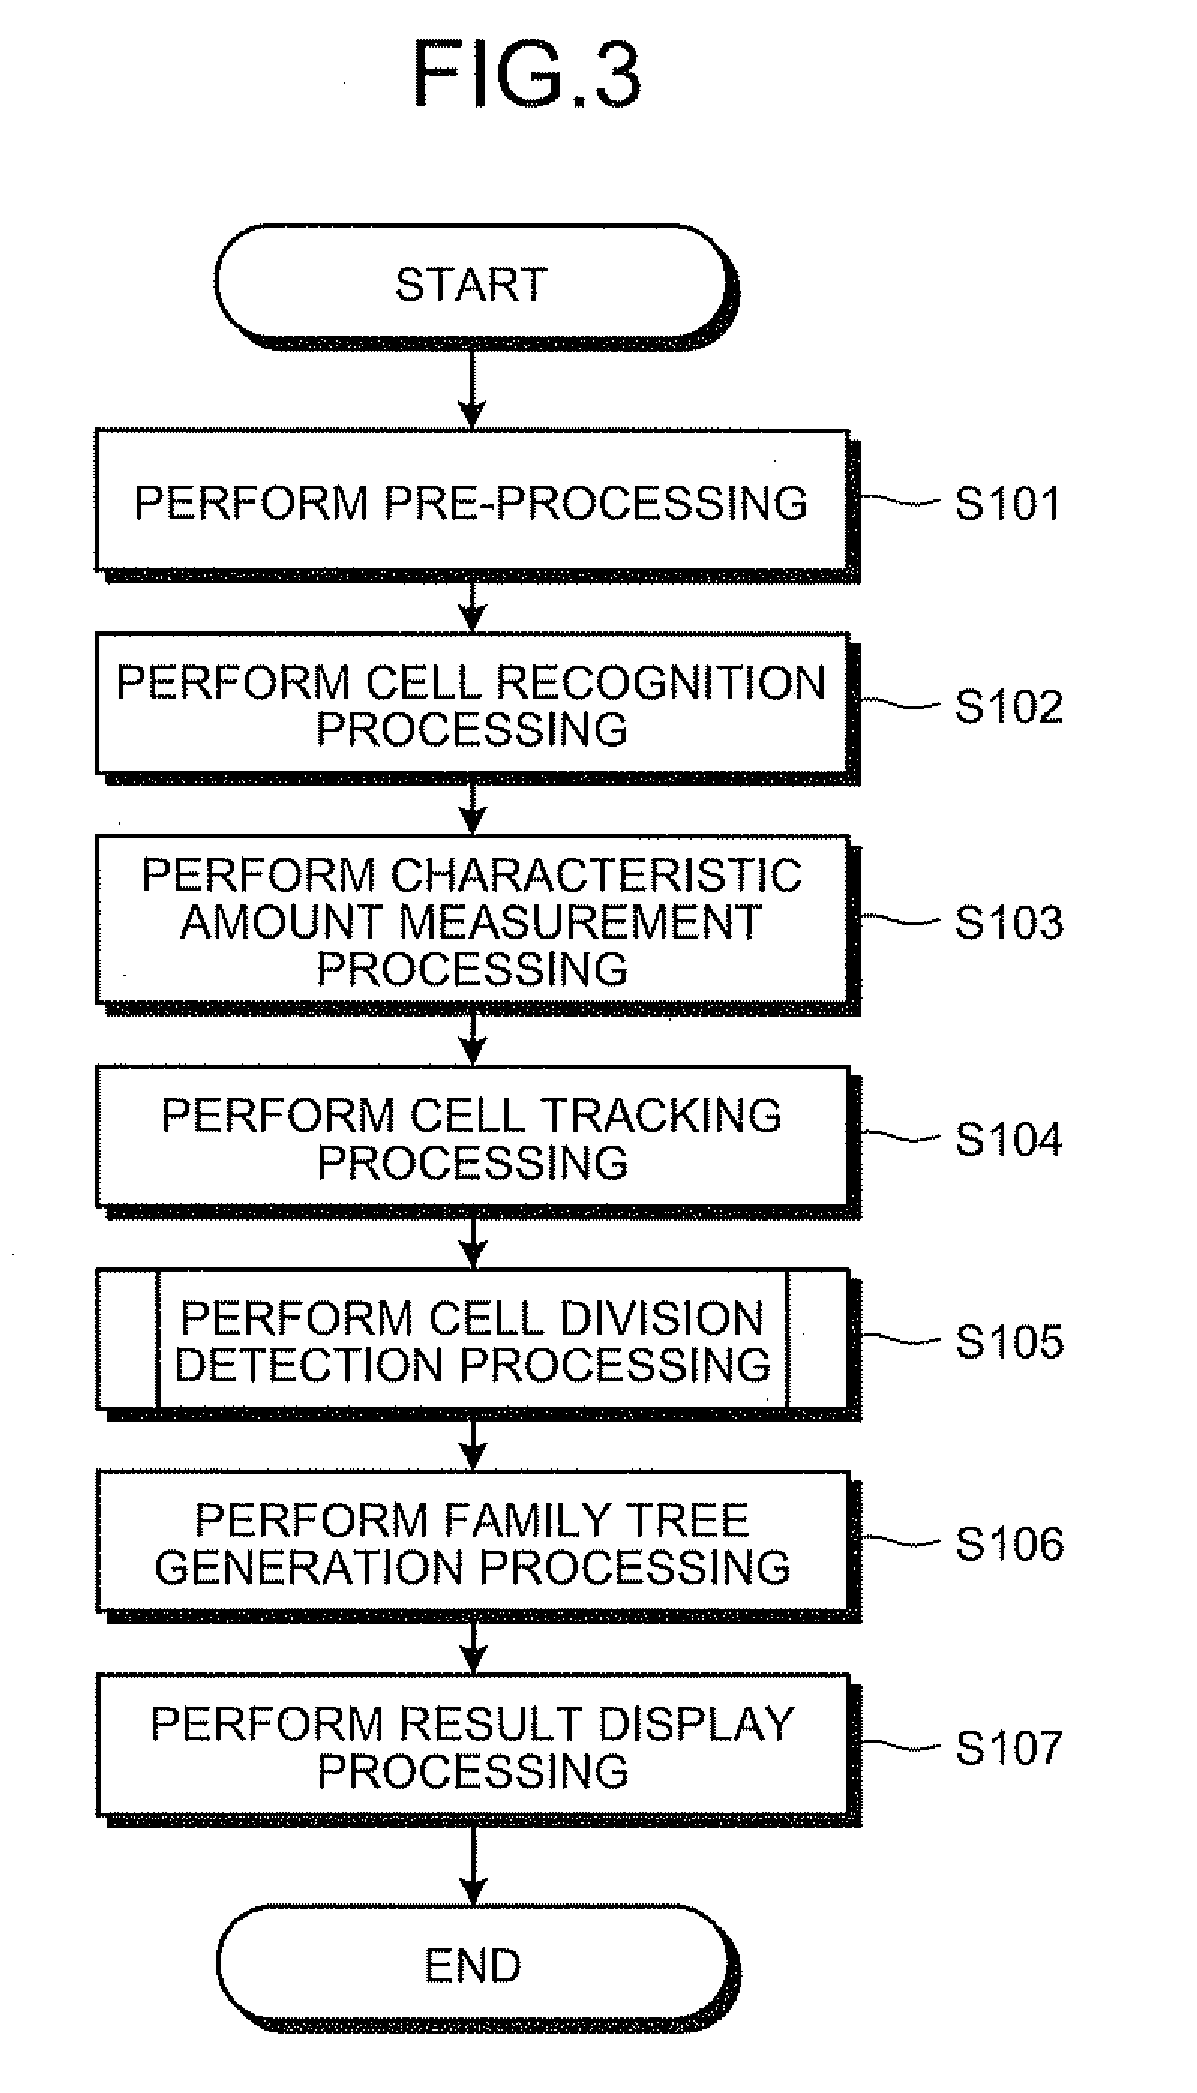 Image processing apparatus and computer program product